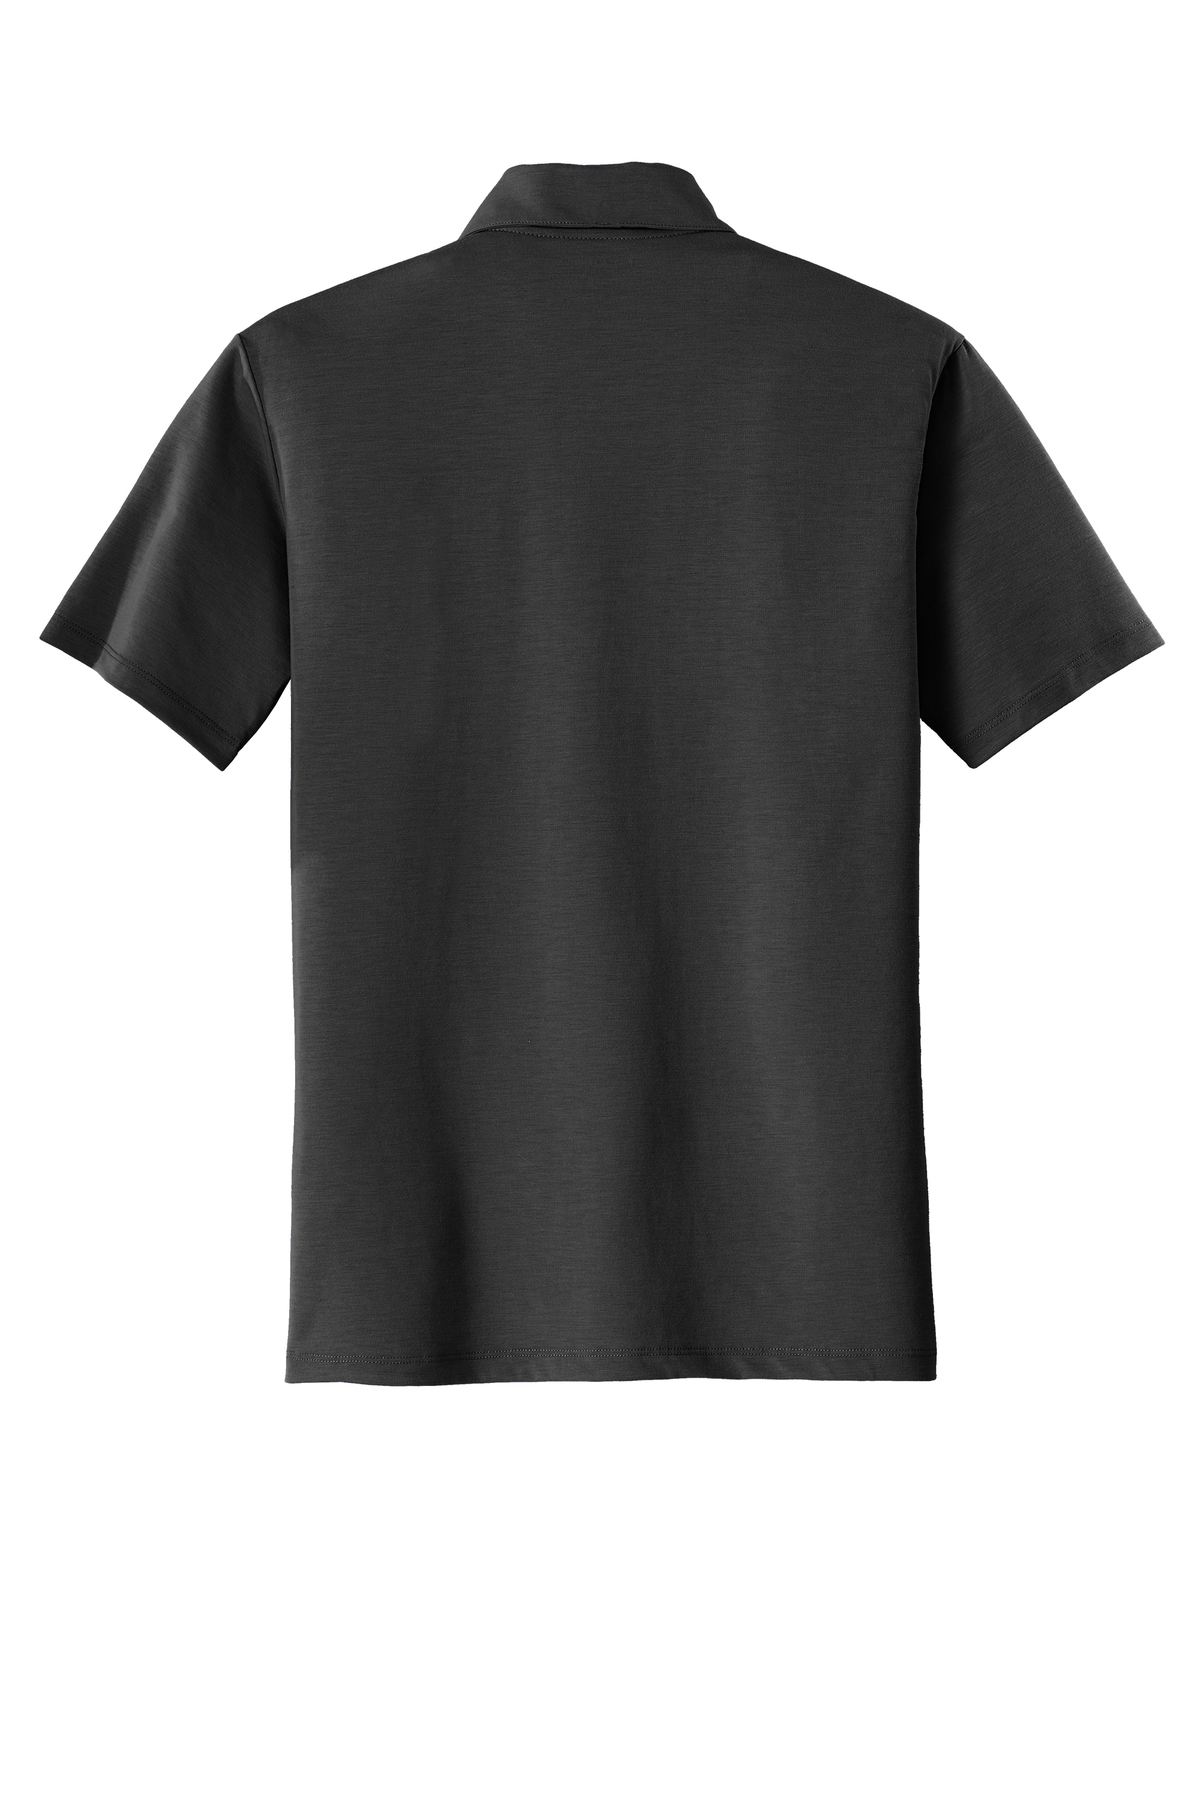 Port Authority ® Cotton Touch ™ Performance Polo | Product | Company ...